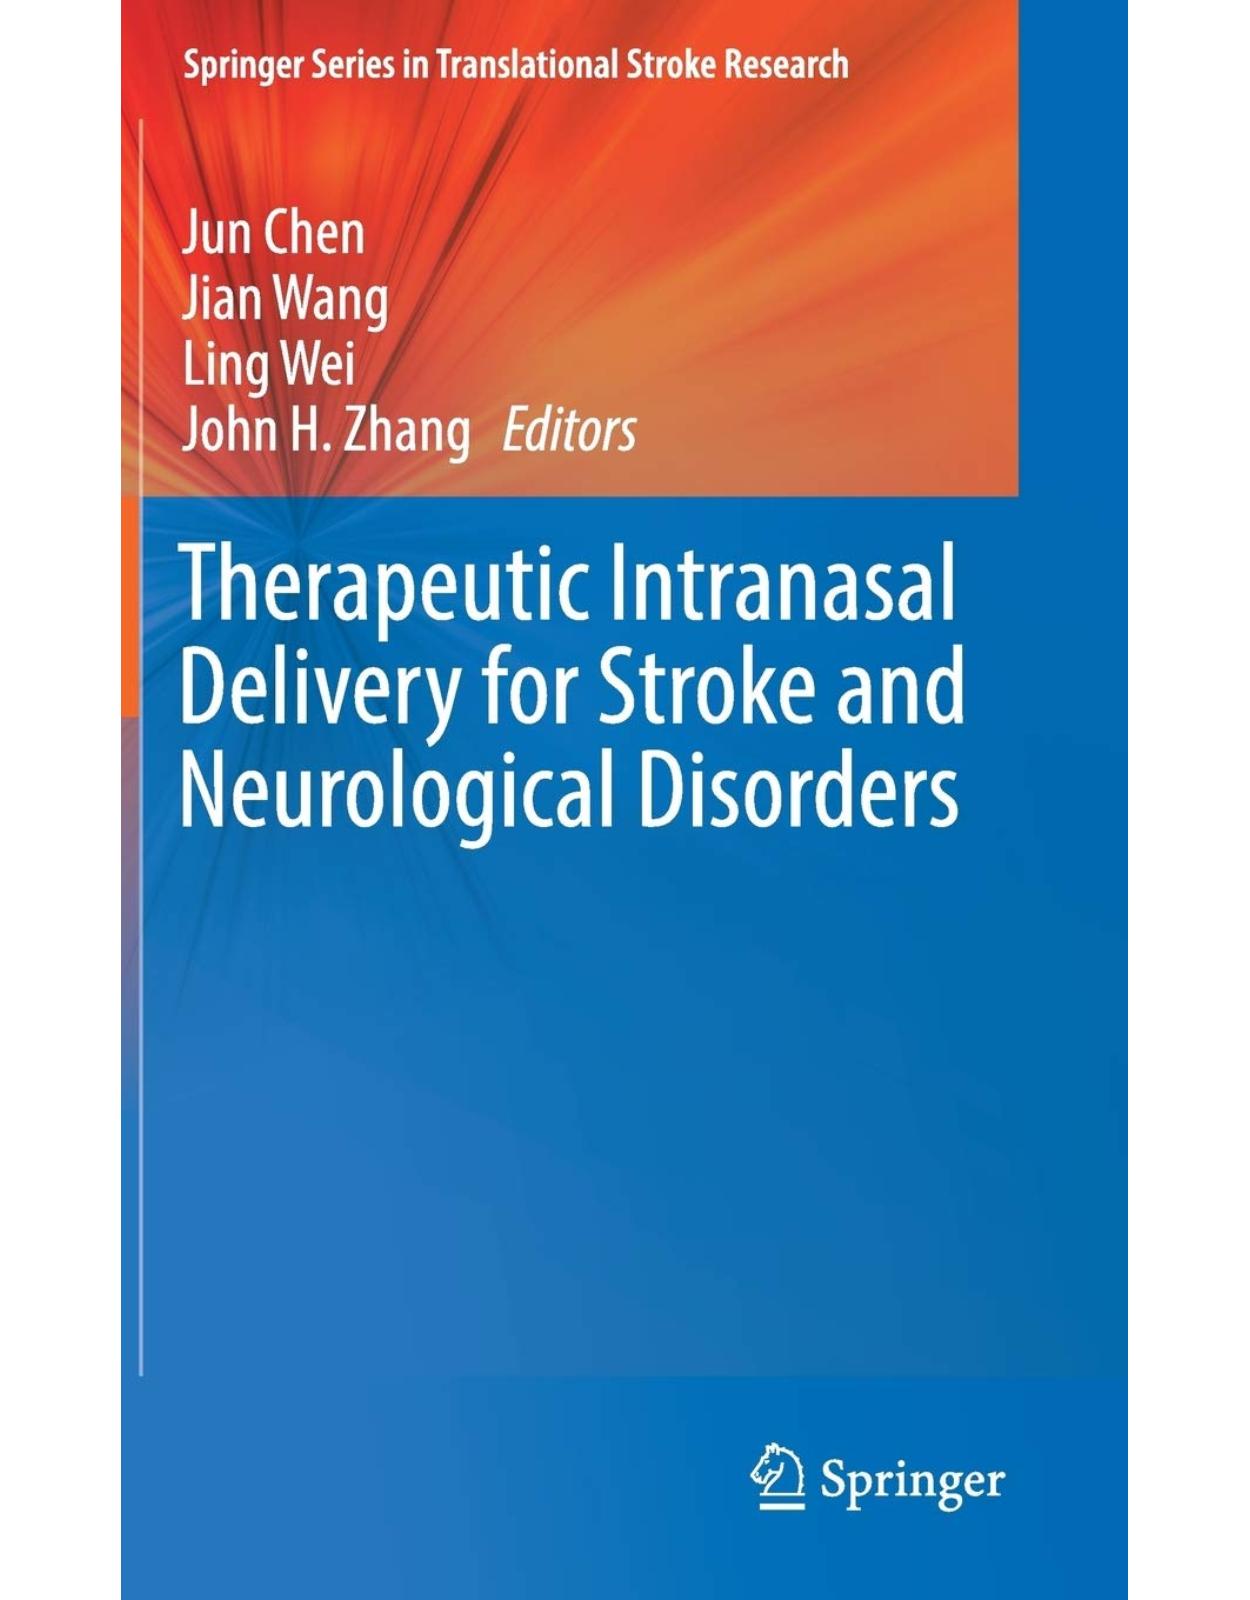 Therapeutic Intranasal Delivery for Stroke and Neurological Disorders (Springer Series in Translational Stroke Research) 